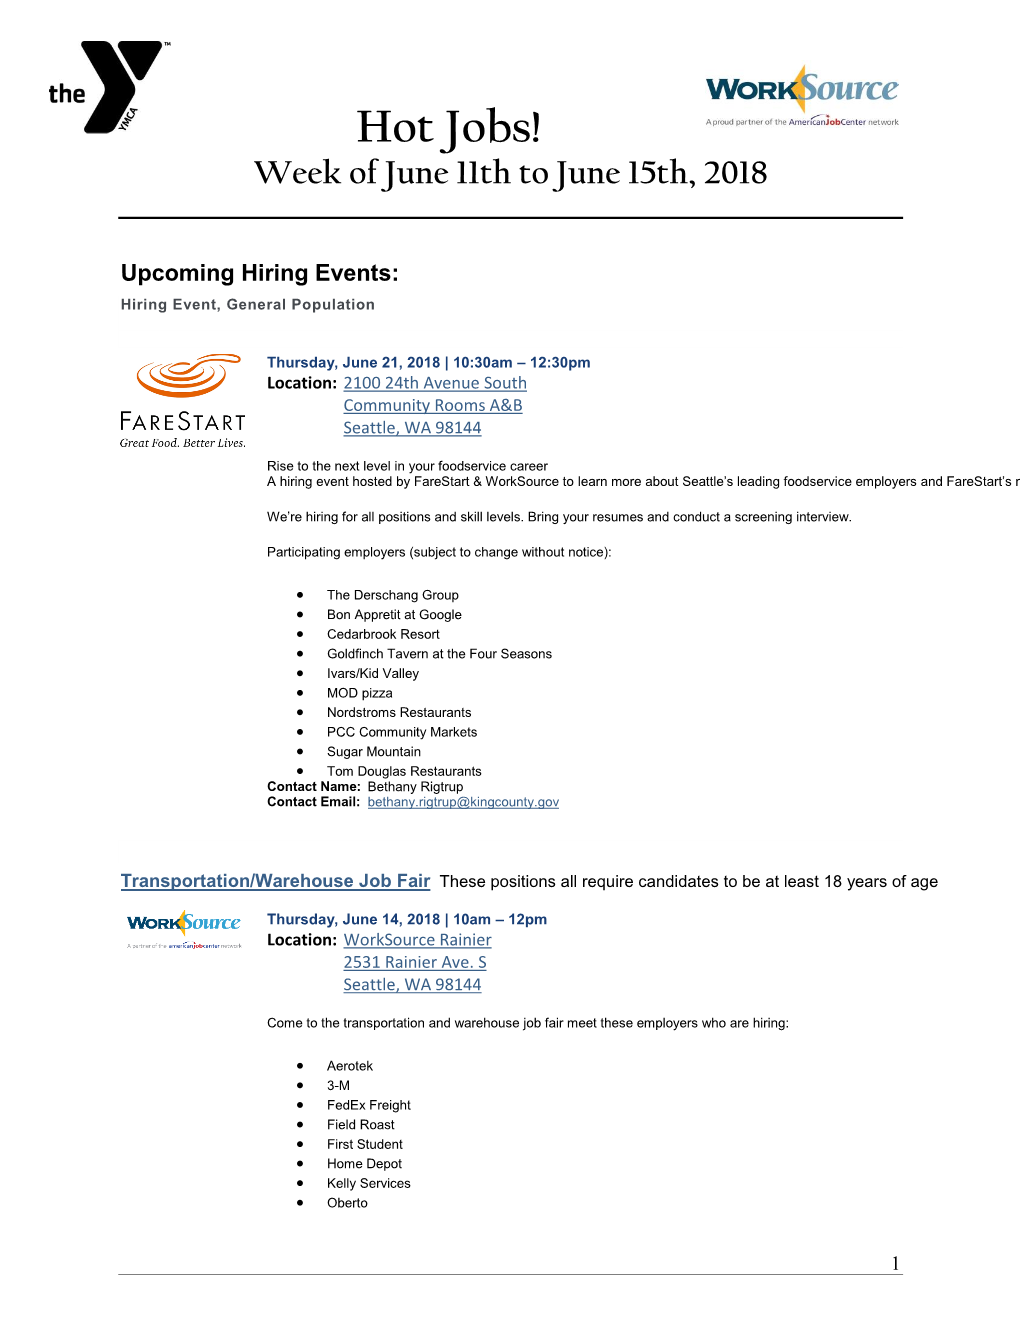 Hot Jobs! Week of June 11Th to June 15Th, 2018